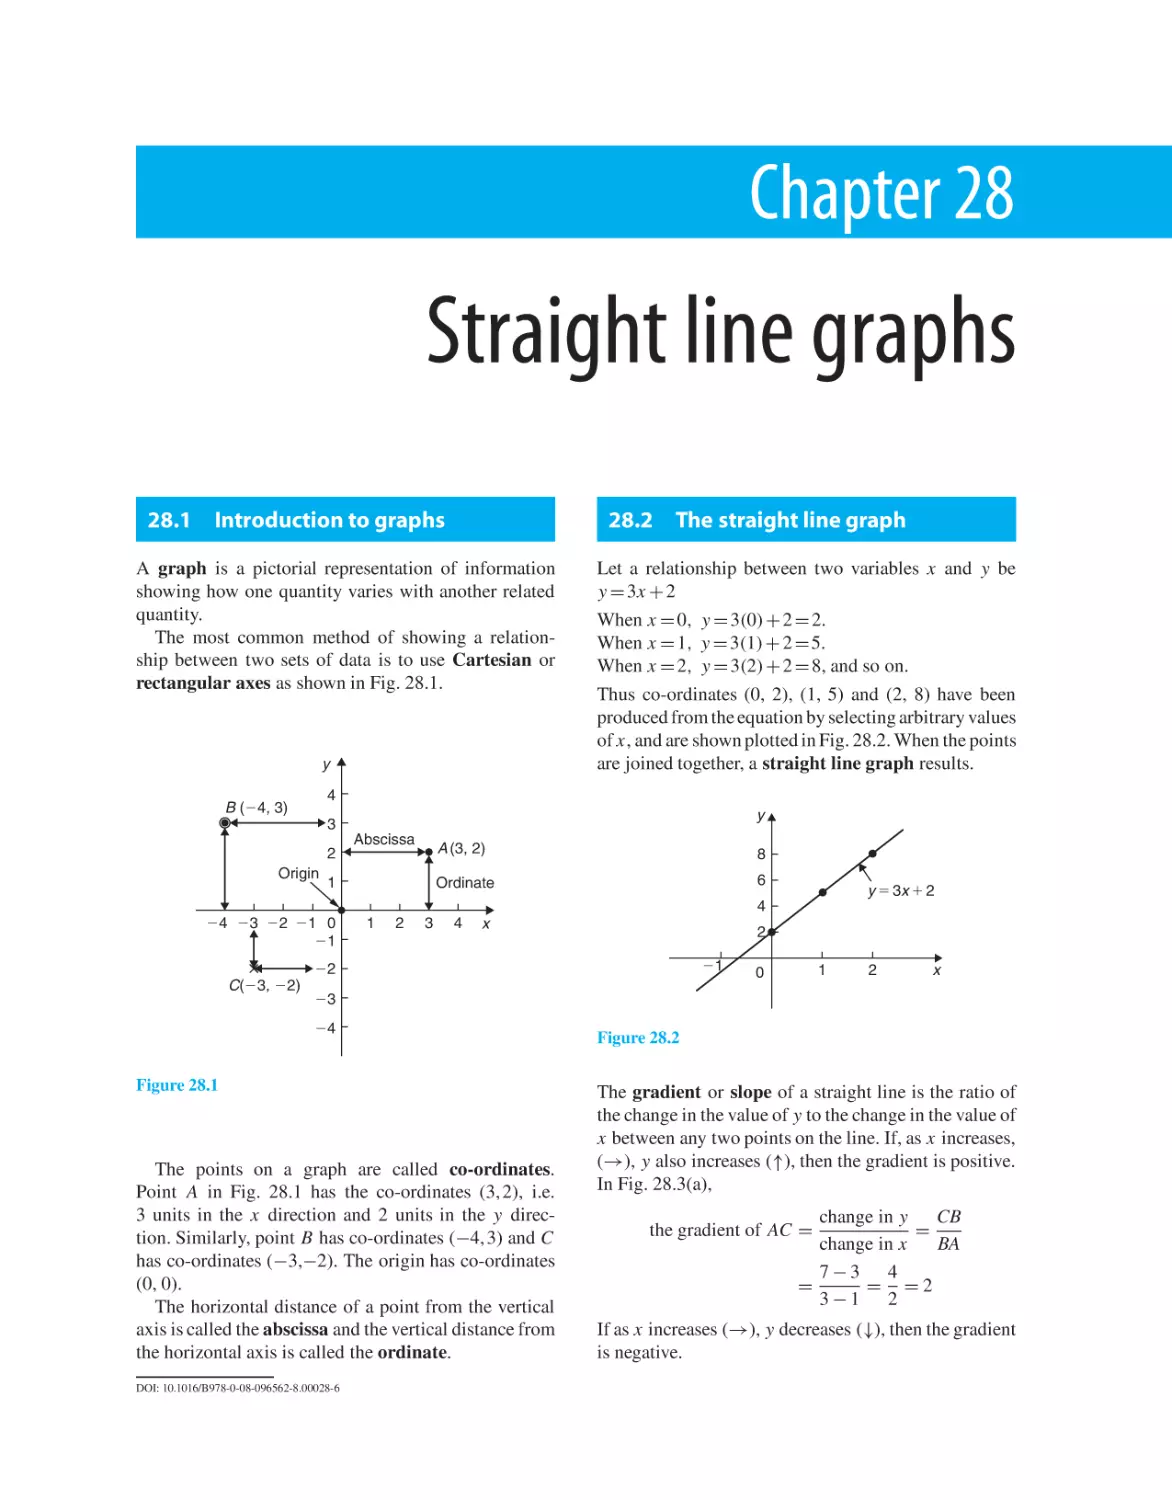 Chapter 28. Straight line graphs
28.1 Introduction to graphs
28.2 The straight line graph